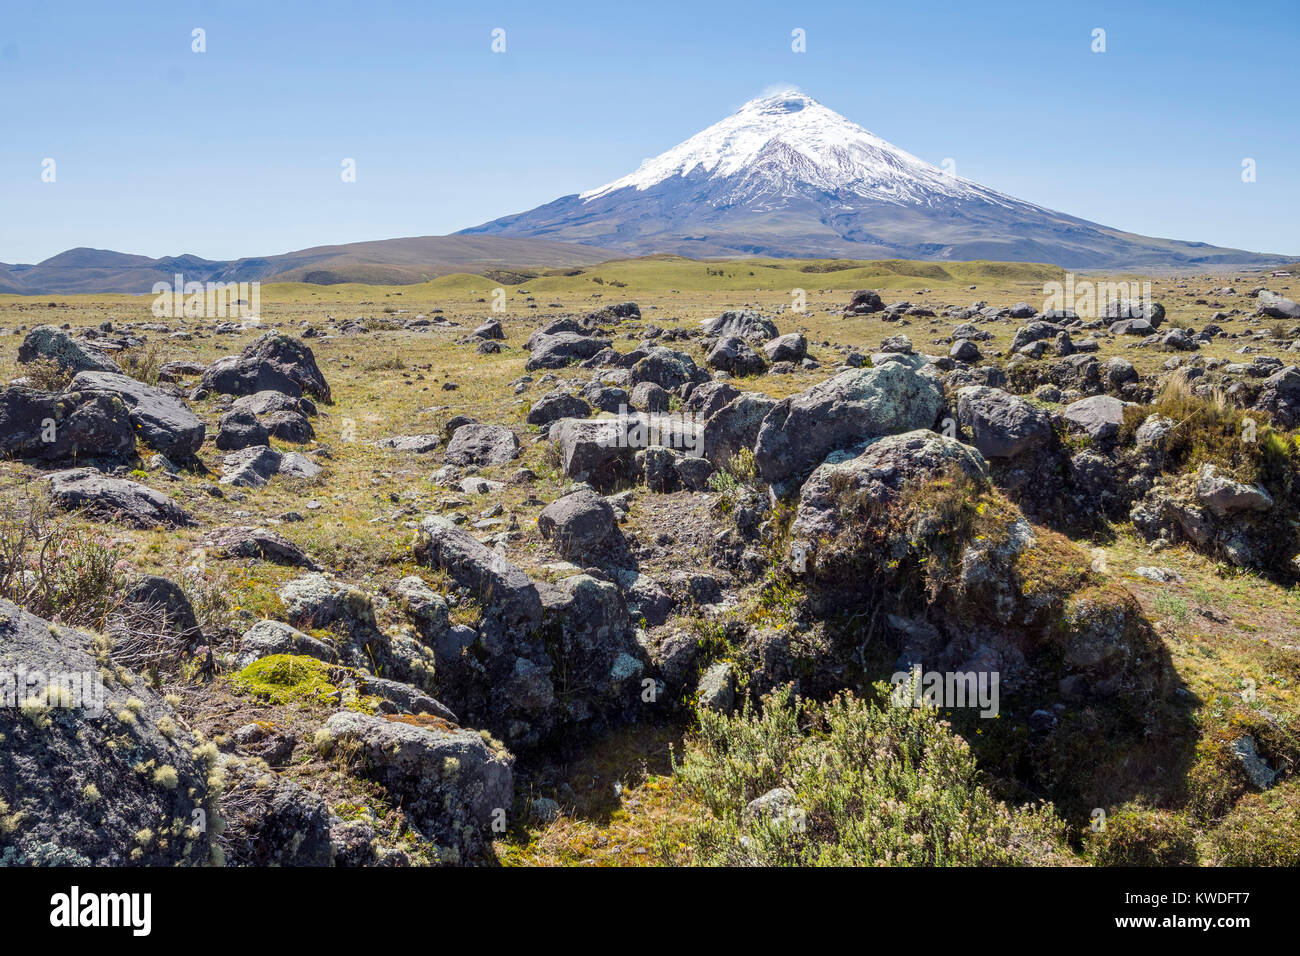 Cotopaxi Volcano, Ecuador with lichen covered boulders thrown out from past eruptions in the foreground. One of the world's highest active volcanoes a Stock Photo